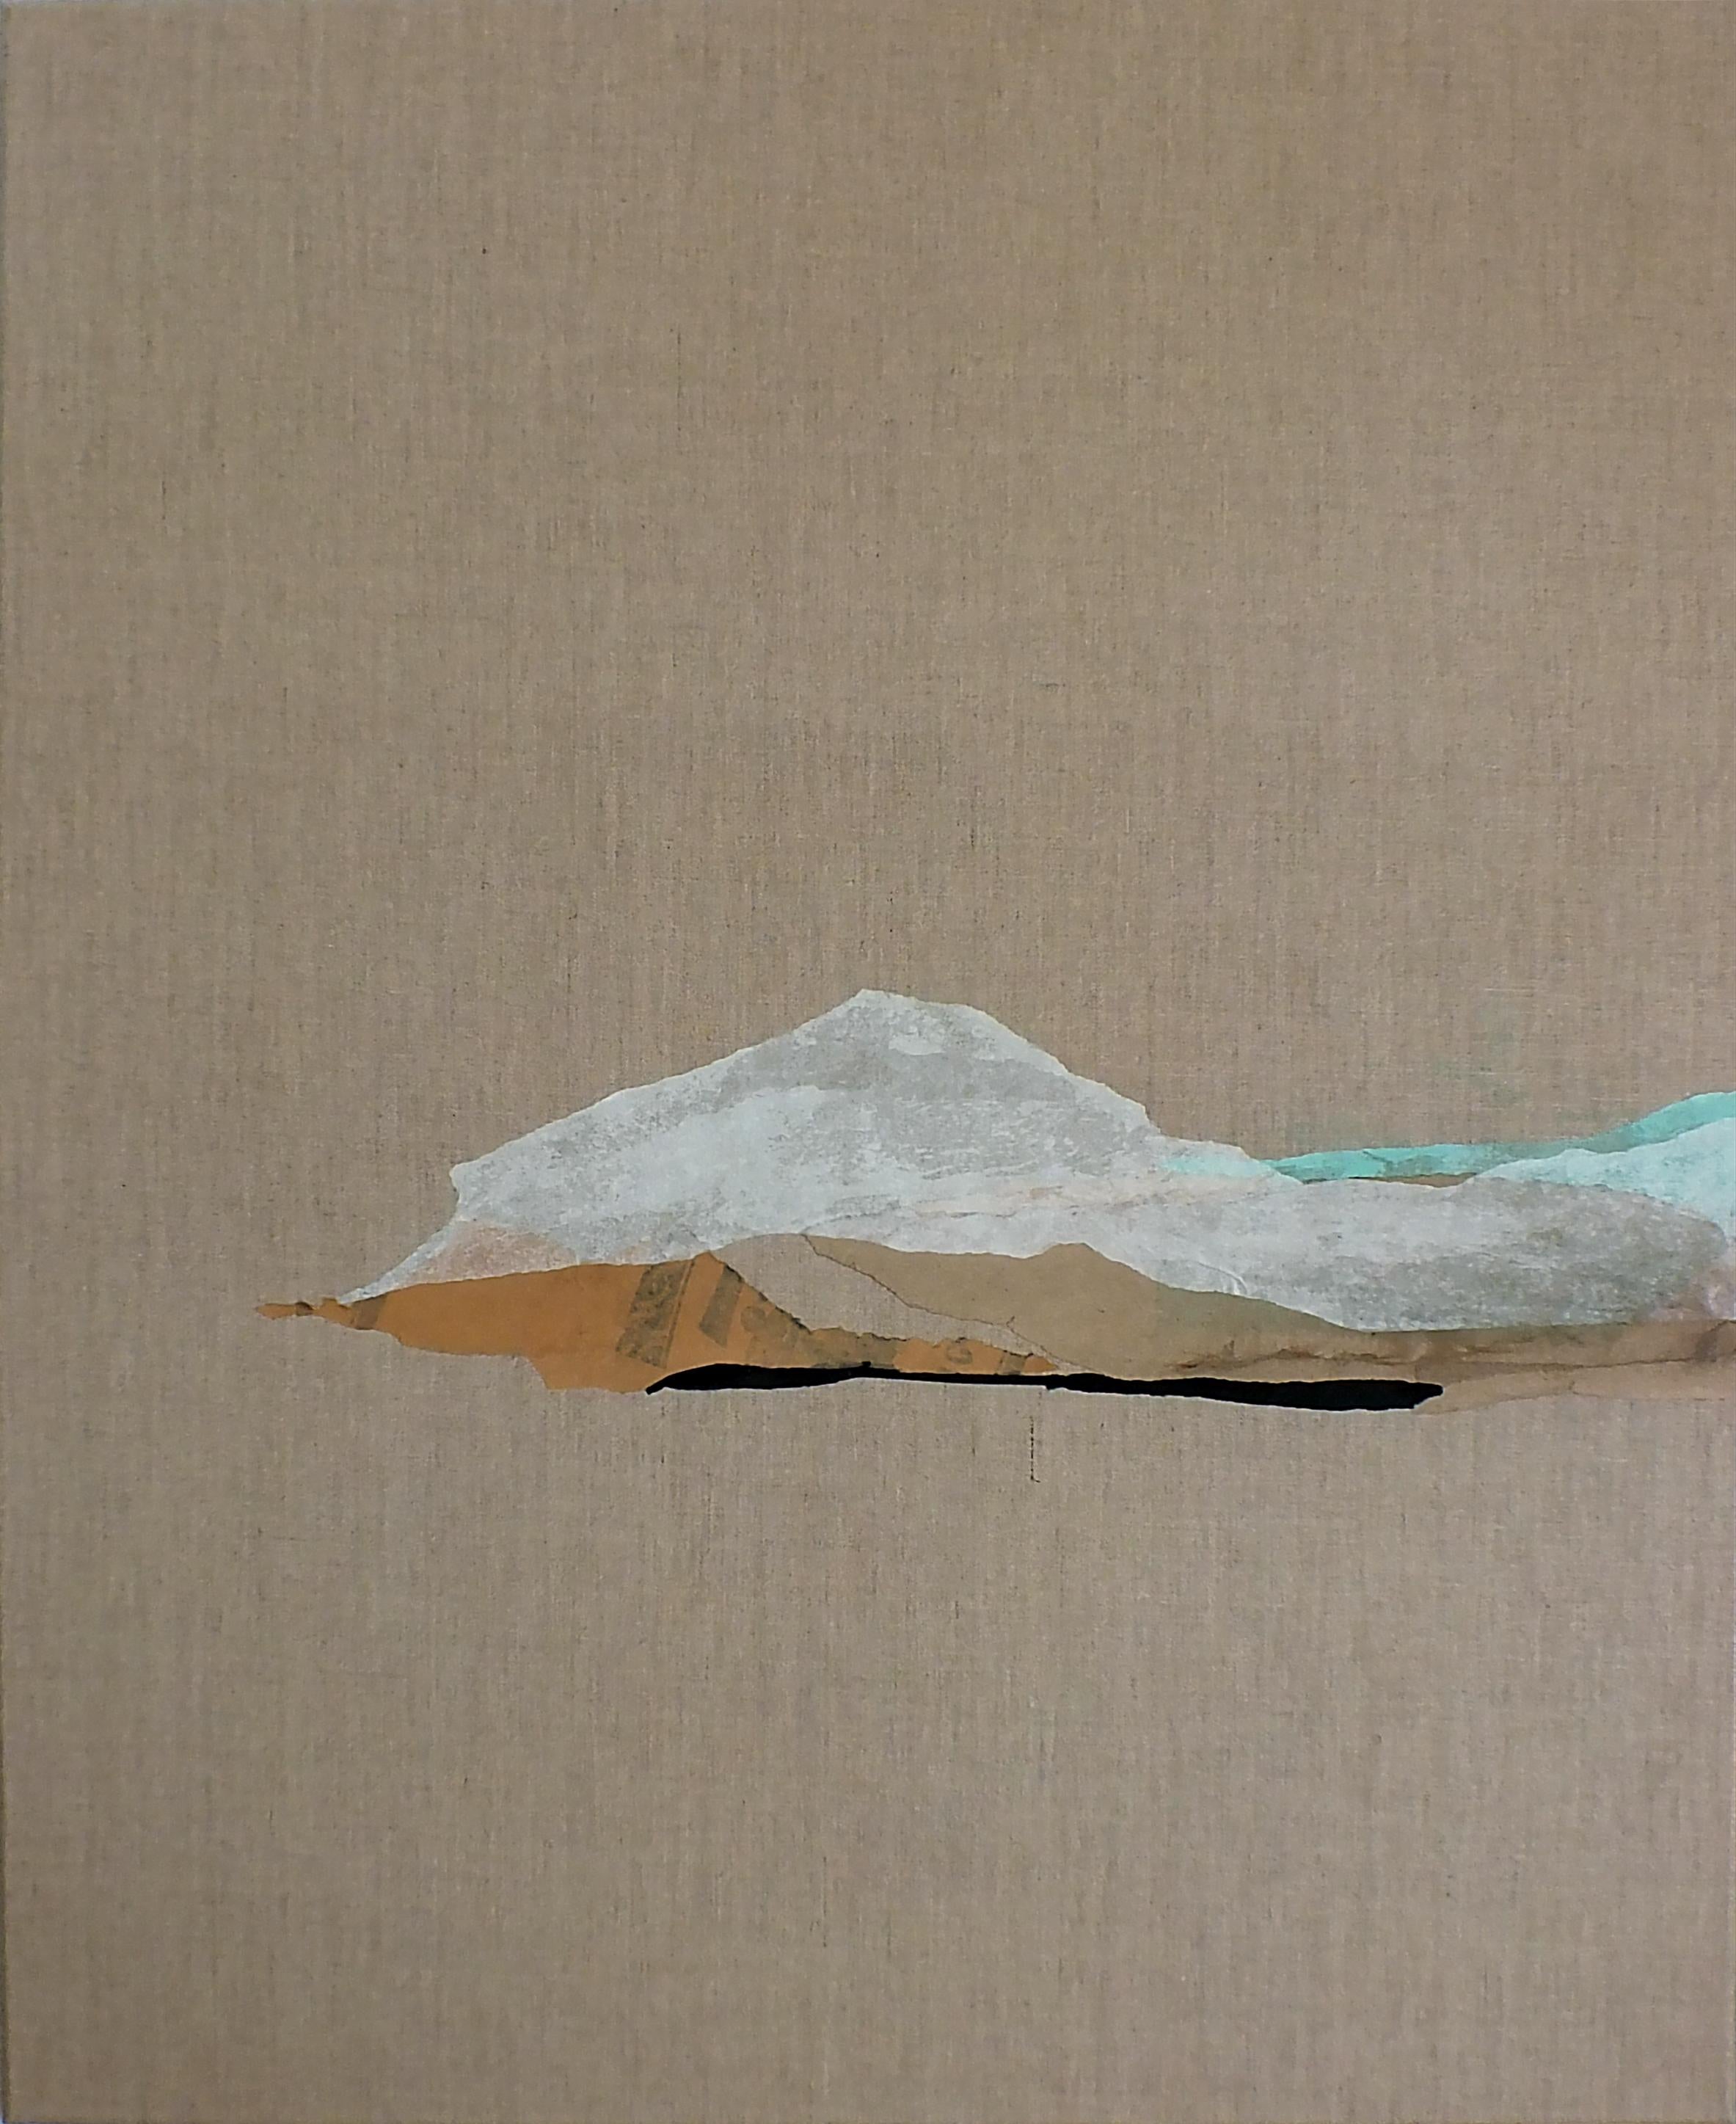 "PaperLandscape" Abstract Landscape Collage on Linen Canvas Made in Italy  - Mixed Media Art by Marilina Marchica